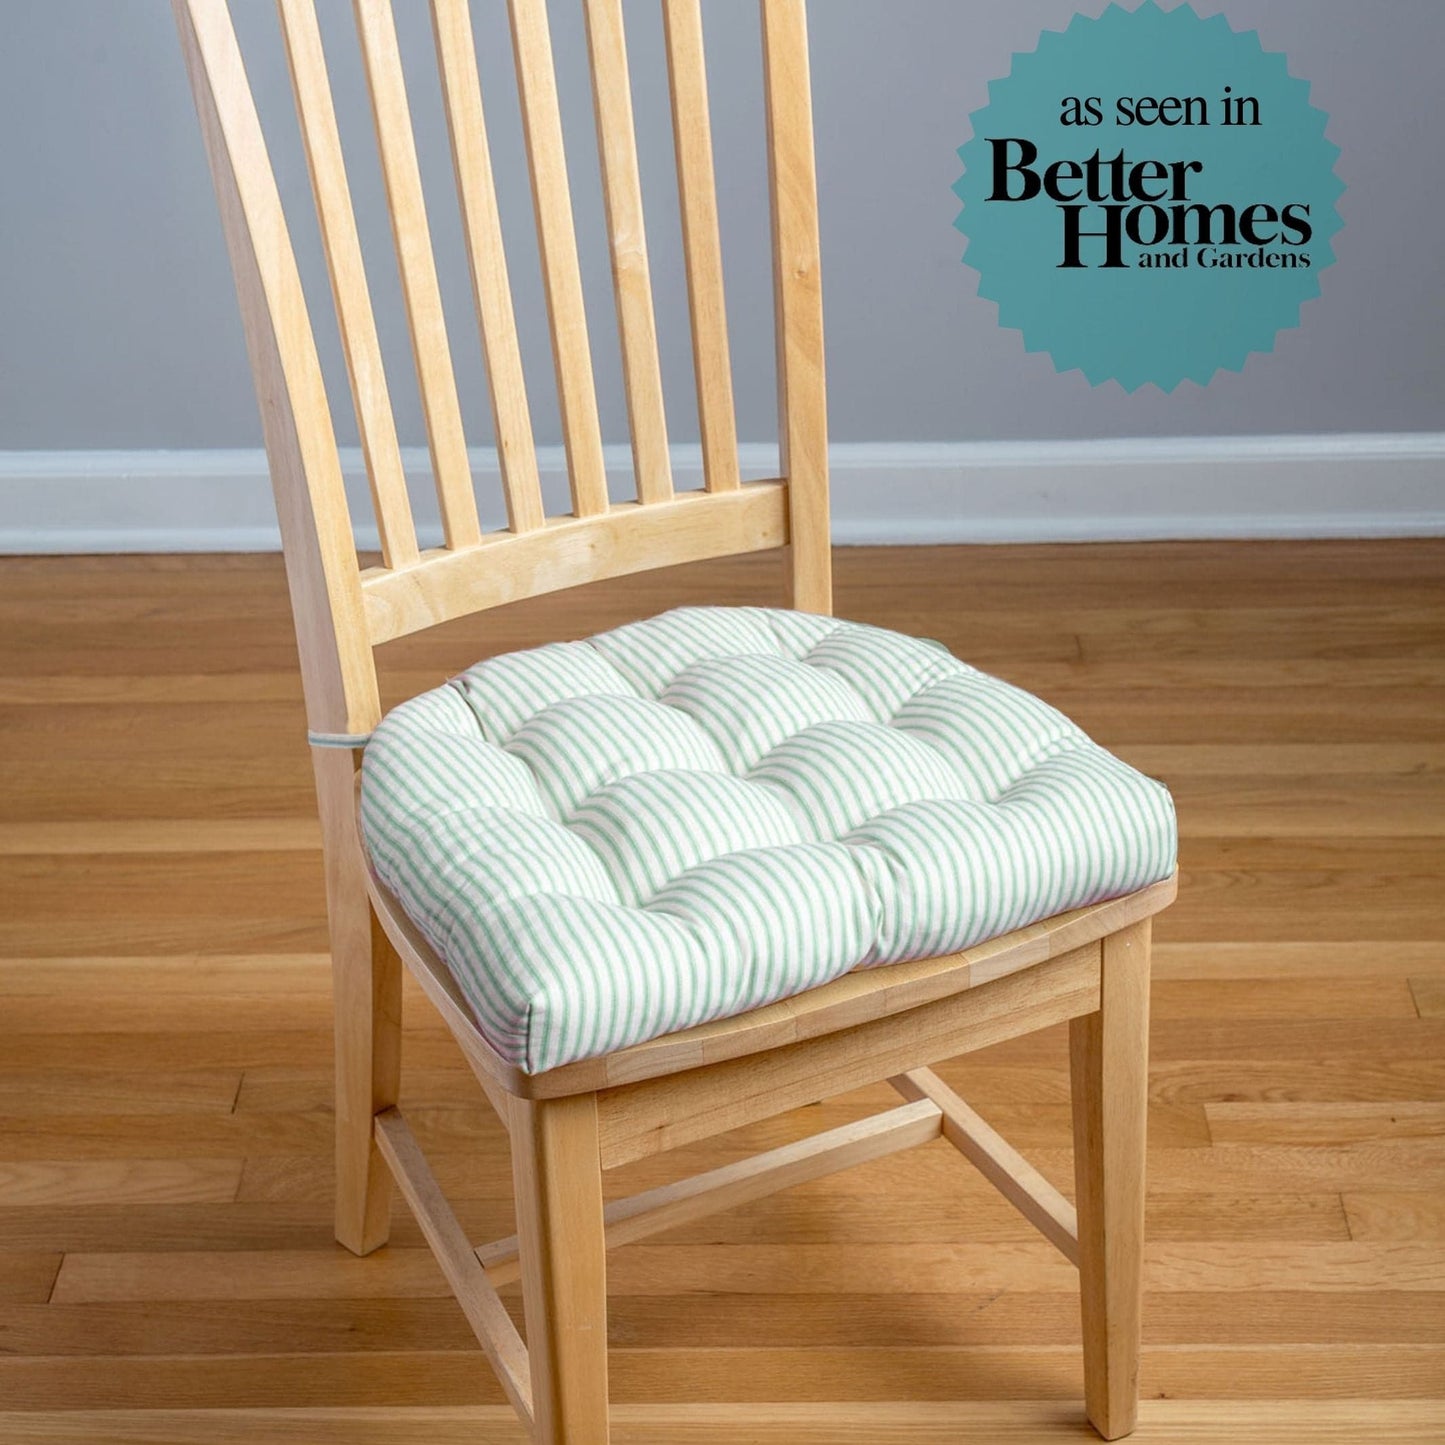 turquoise striped cushions made of 100% cotton on dining room chairs as seen in better homes and gardens